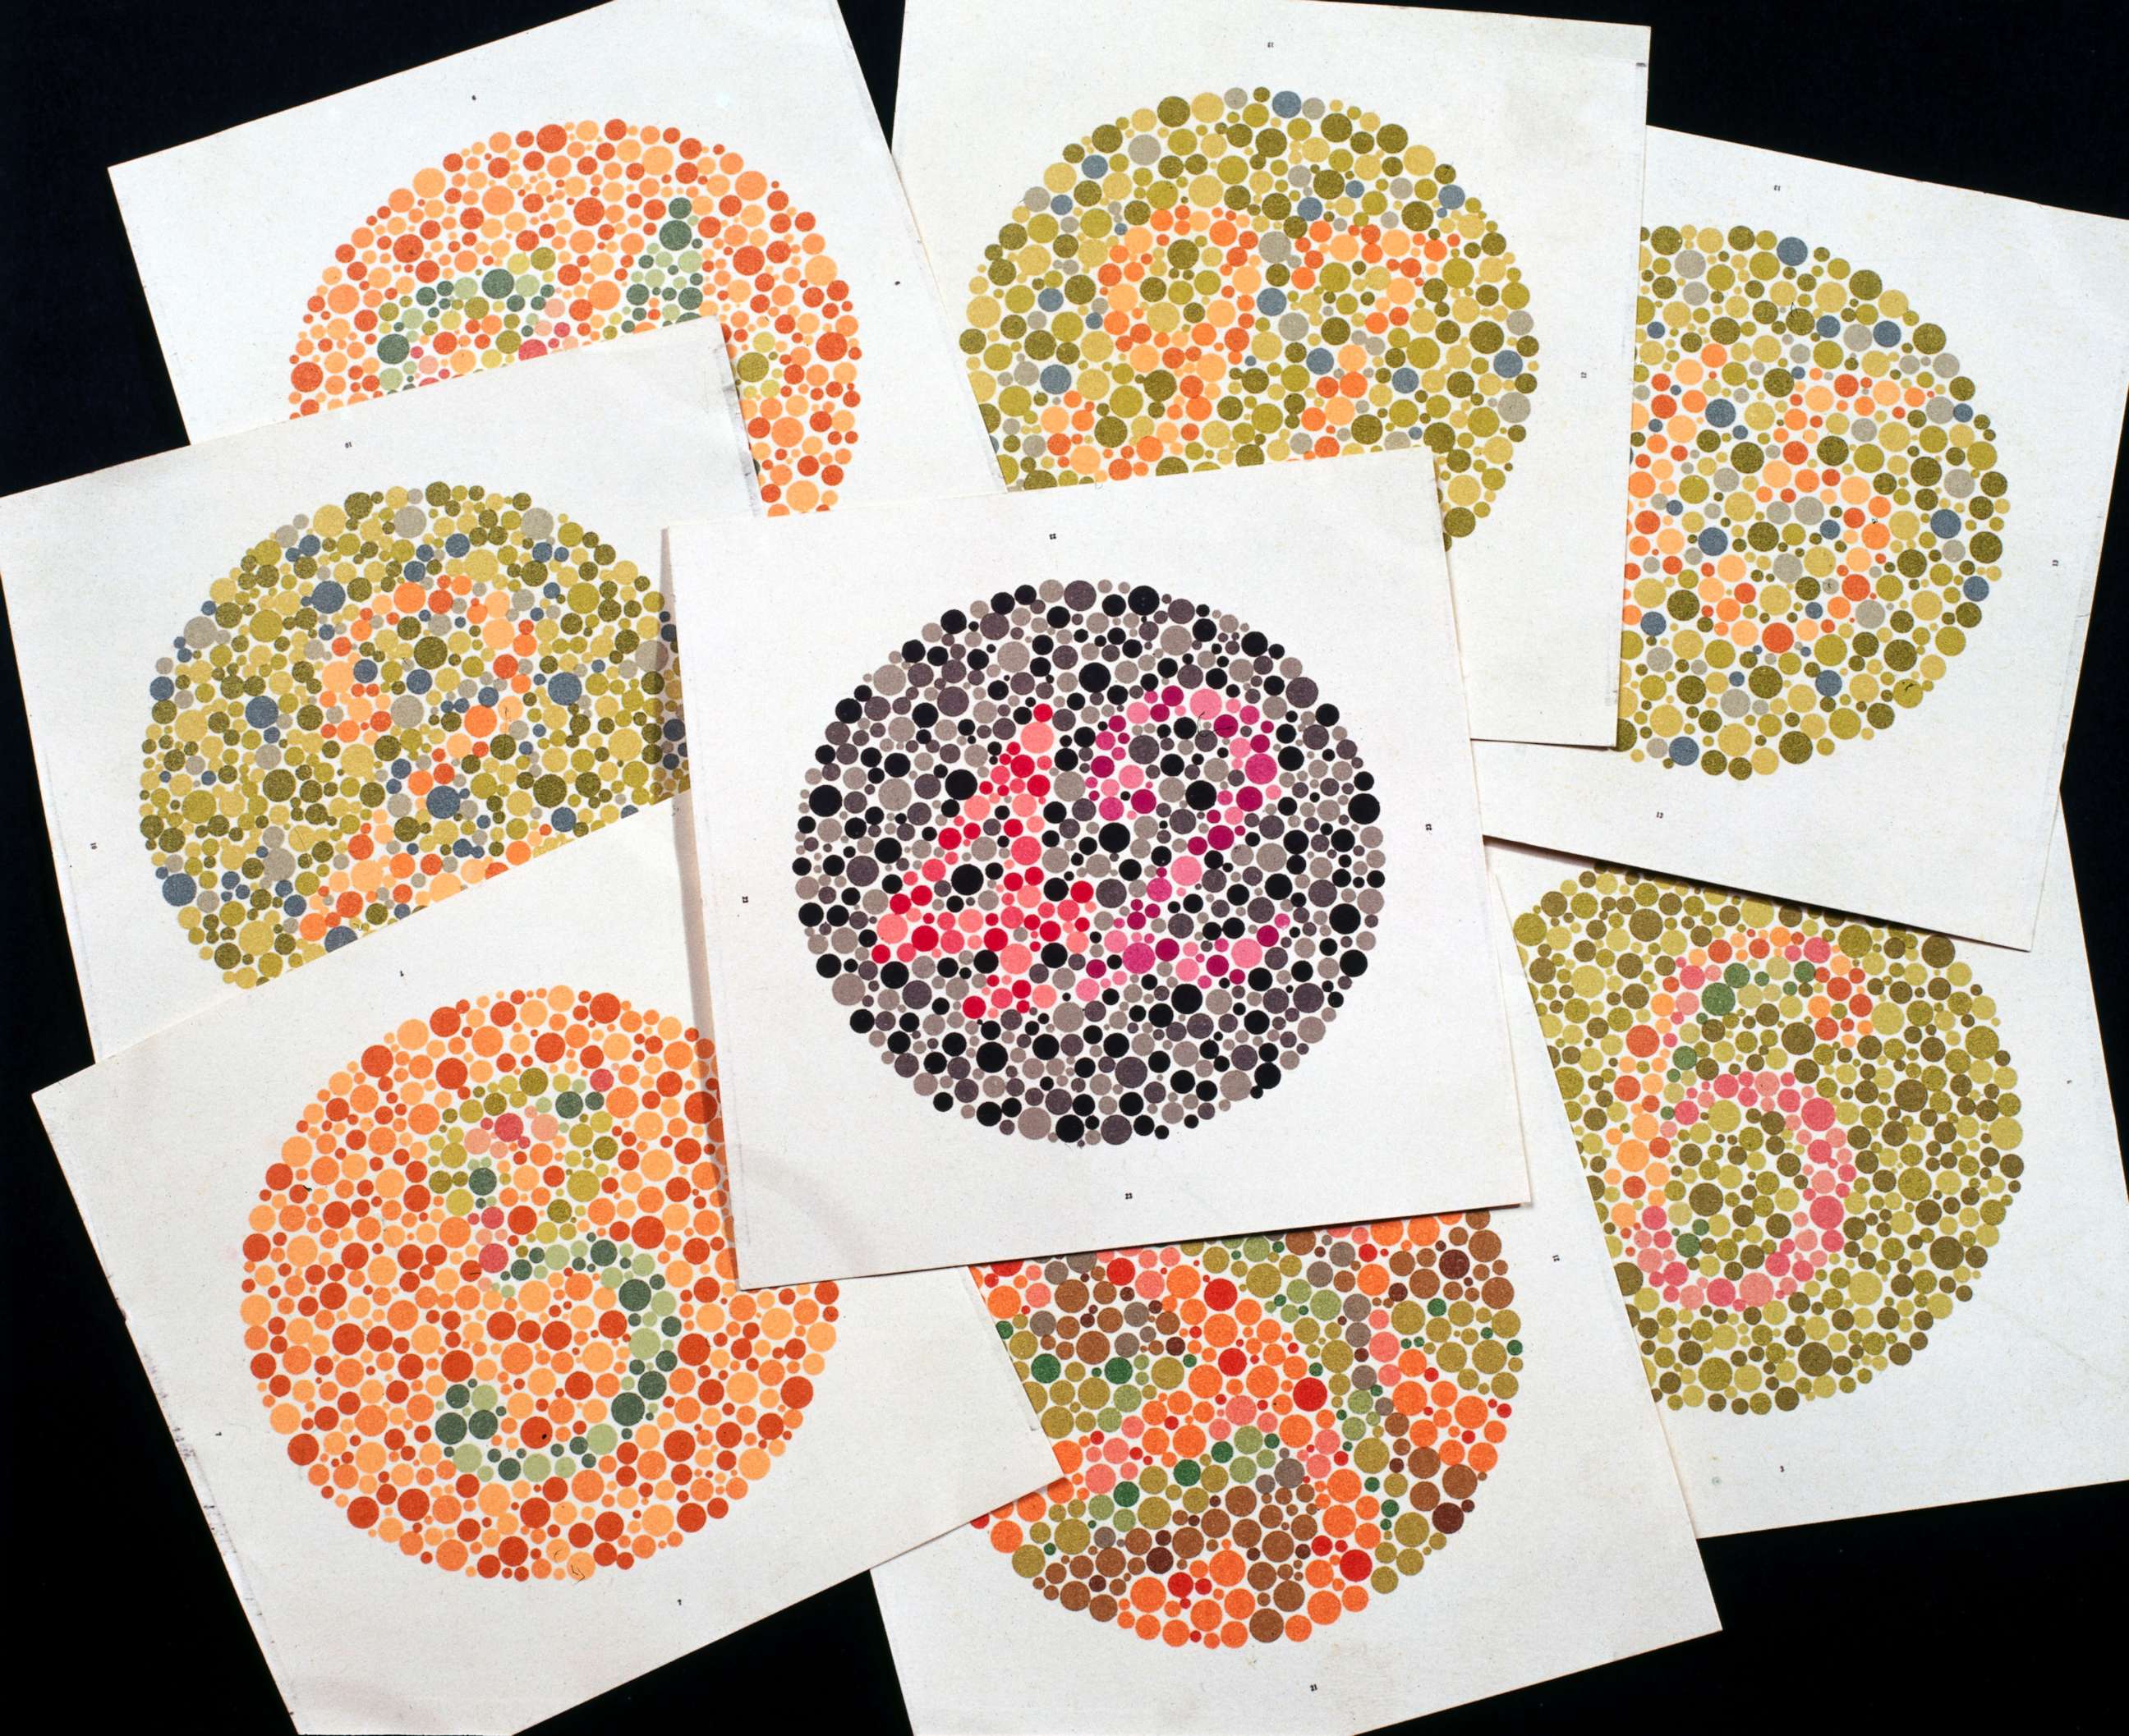 PHOTO: Dr Shinobu Ishihara, Professor Emeritus of the University of Tokyo, Japan, designed this series of plates, pictured in the United Kingdom on Dec. 18, 1998, as a test for color blindness. 